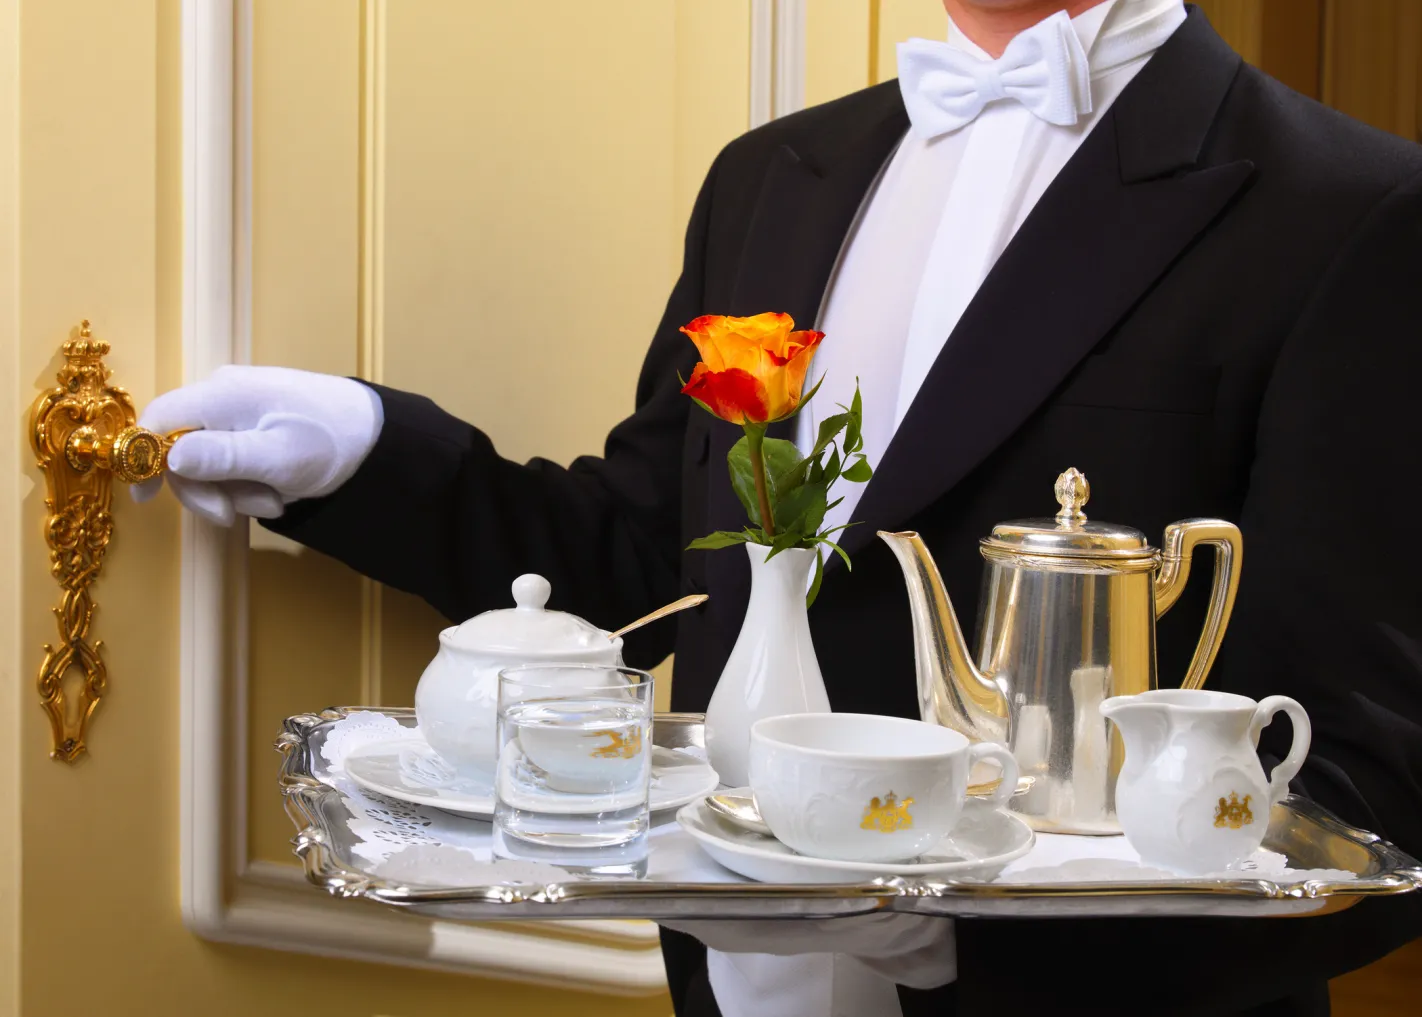 Room service, room cleaning, room cleaning uniform